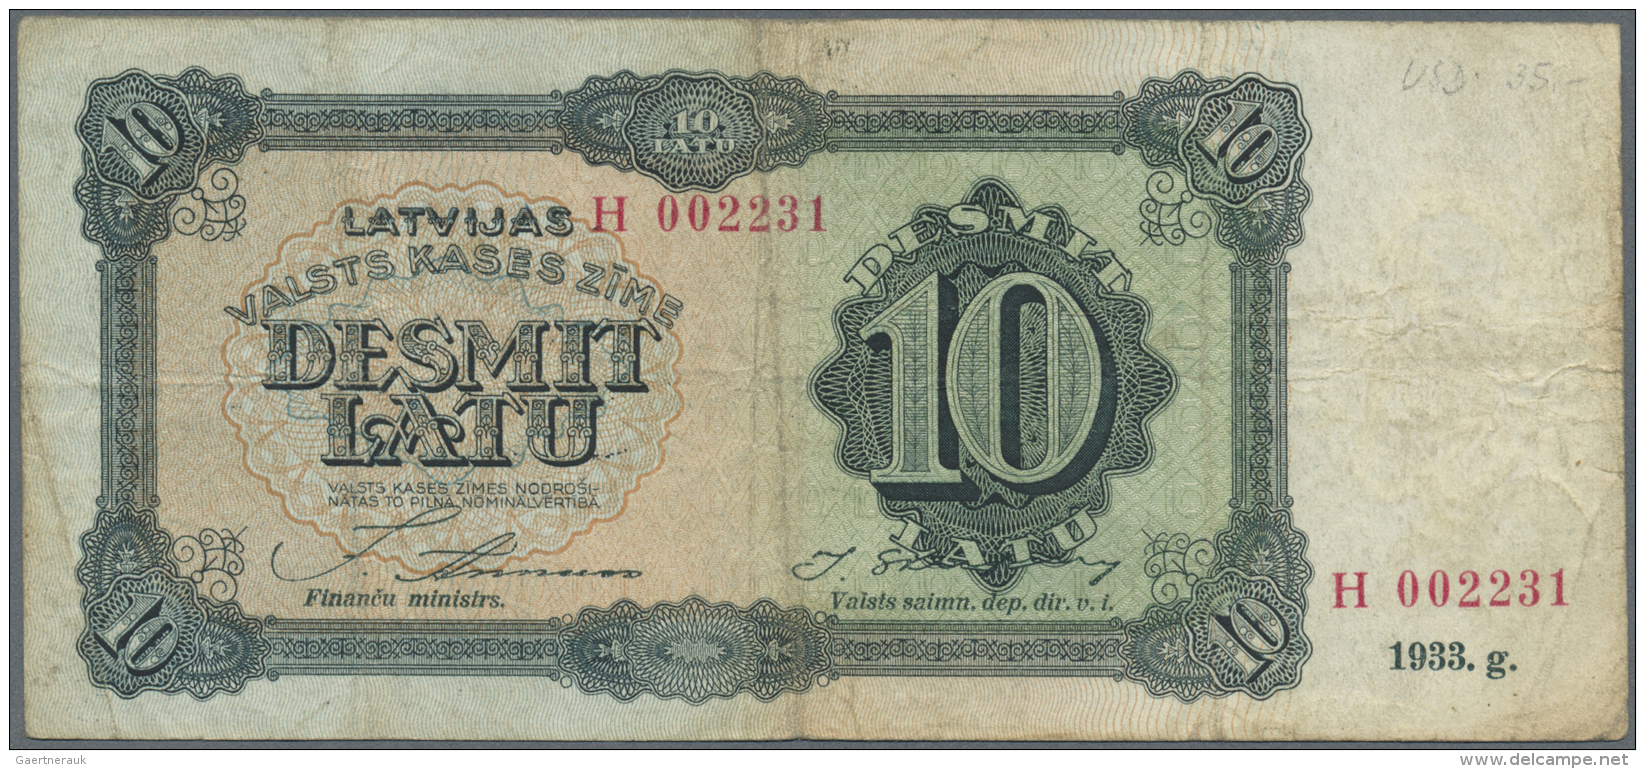 Latvia /Lettland: 10 Latu 1933 P. 25b, Issued Note, Series H, Sign. Annuss, Used With Several Folds And Creases, Stained - Latvia